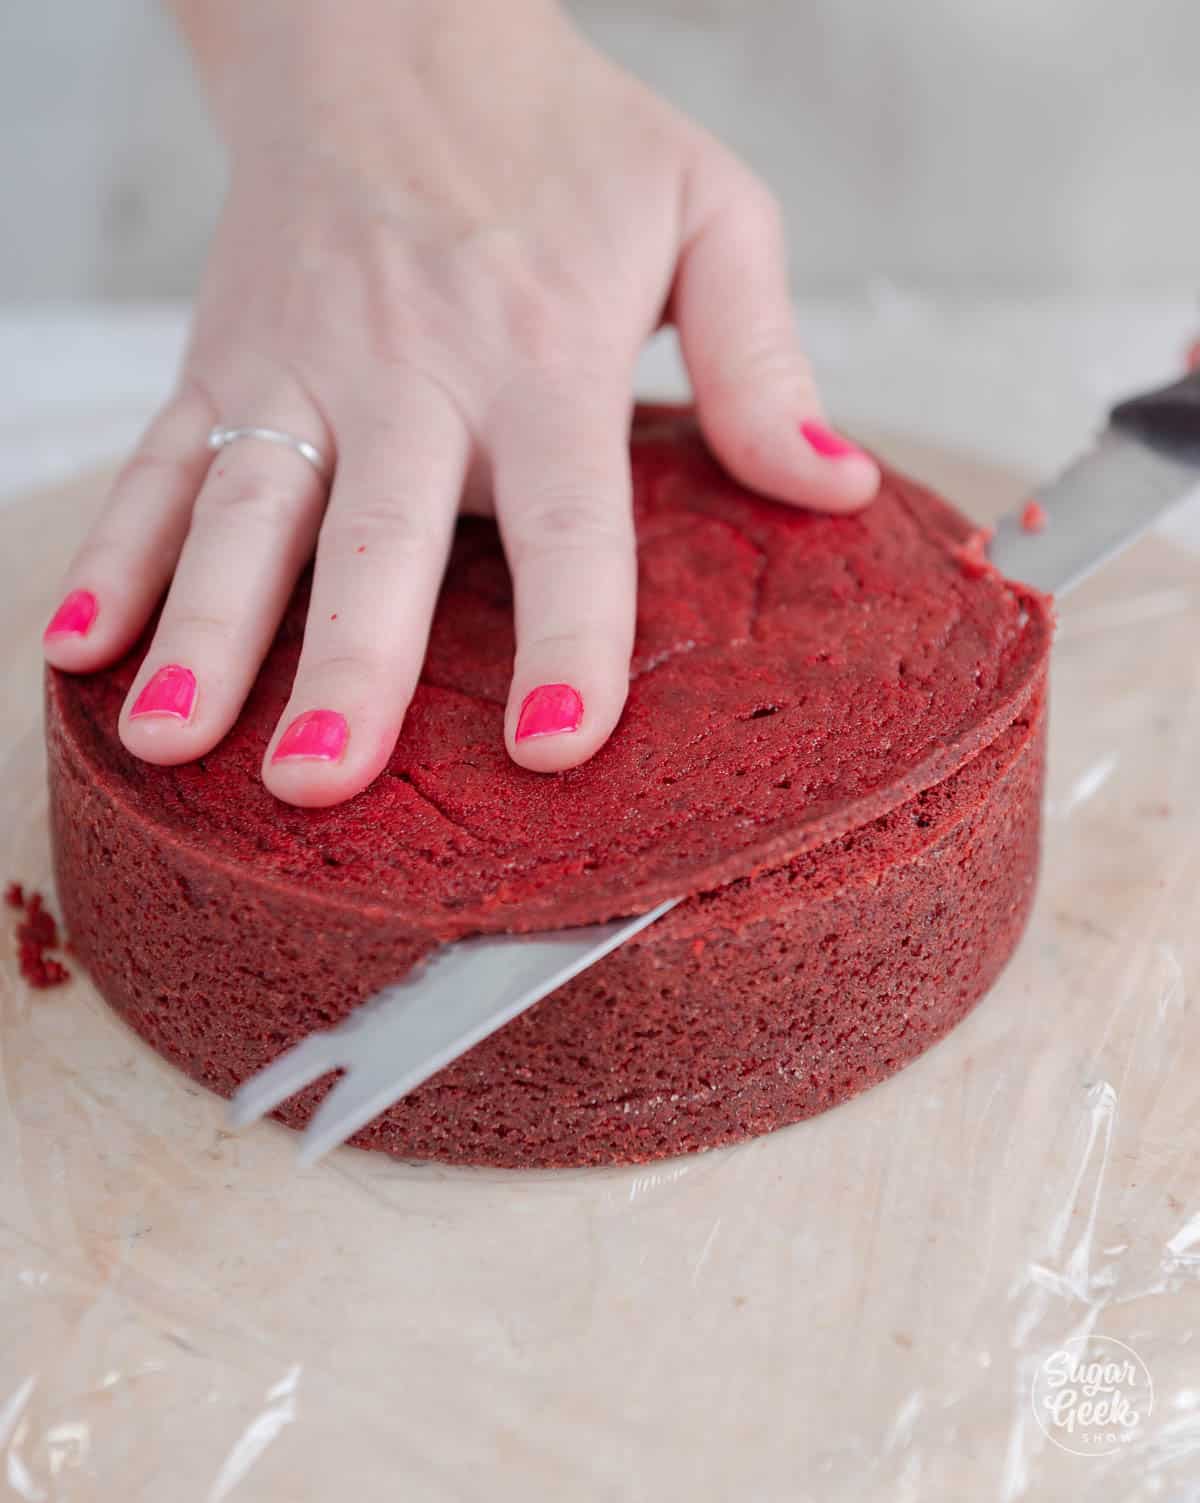 hands trimming domed top off of a layer of cake with a serrated knife.